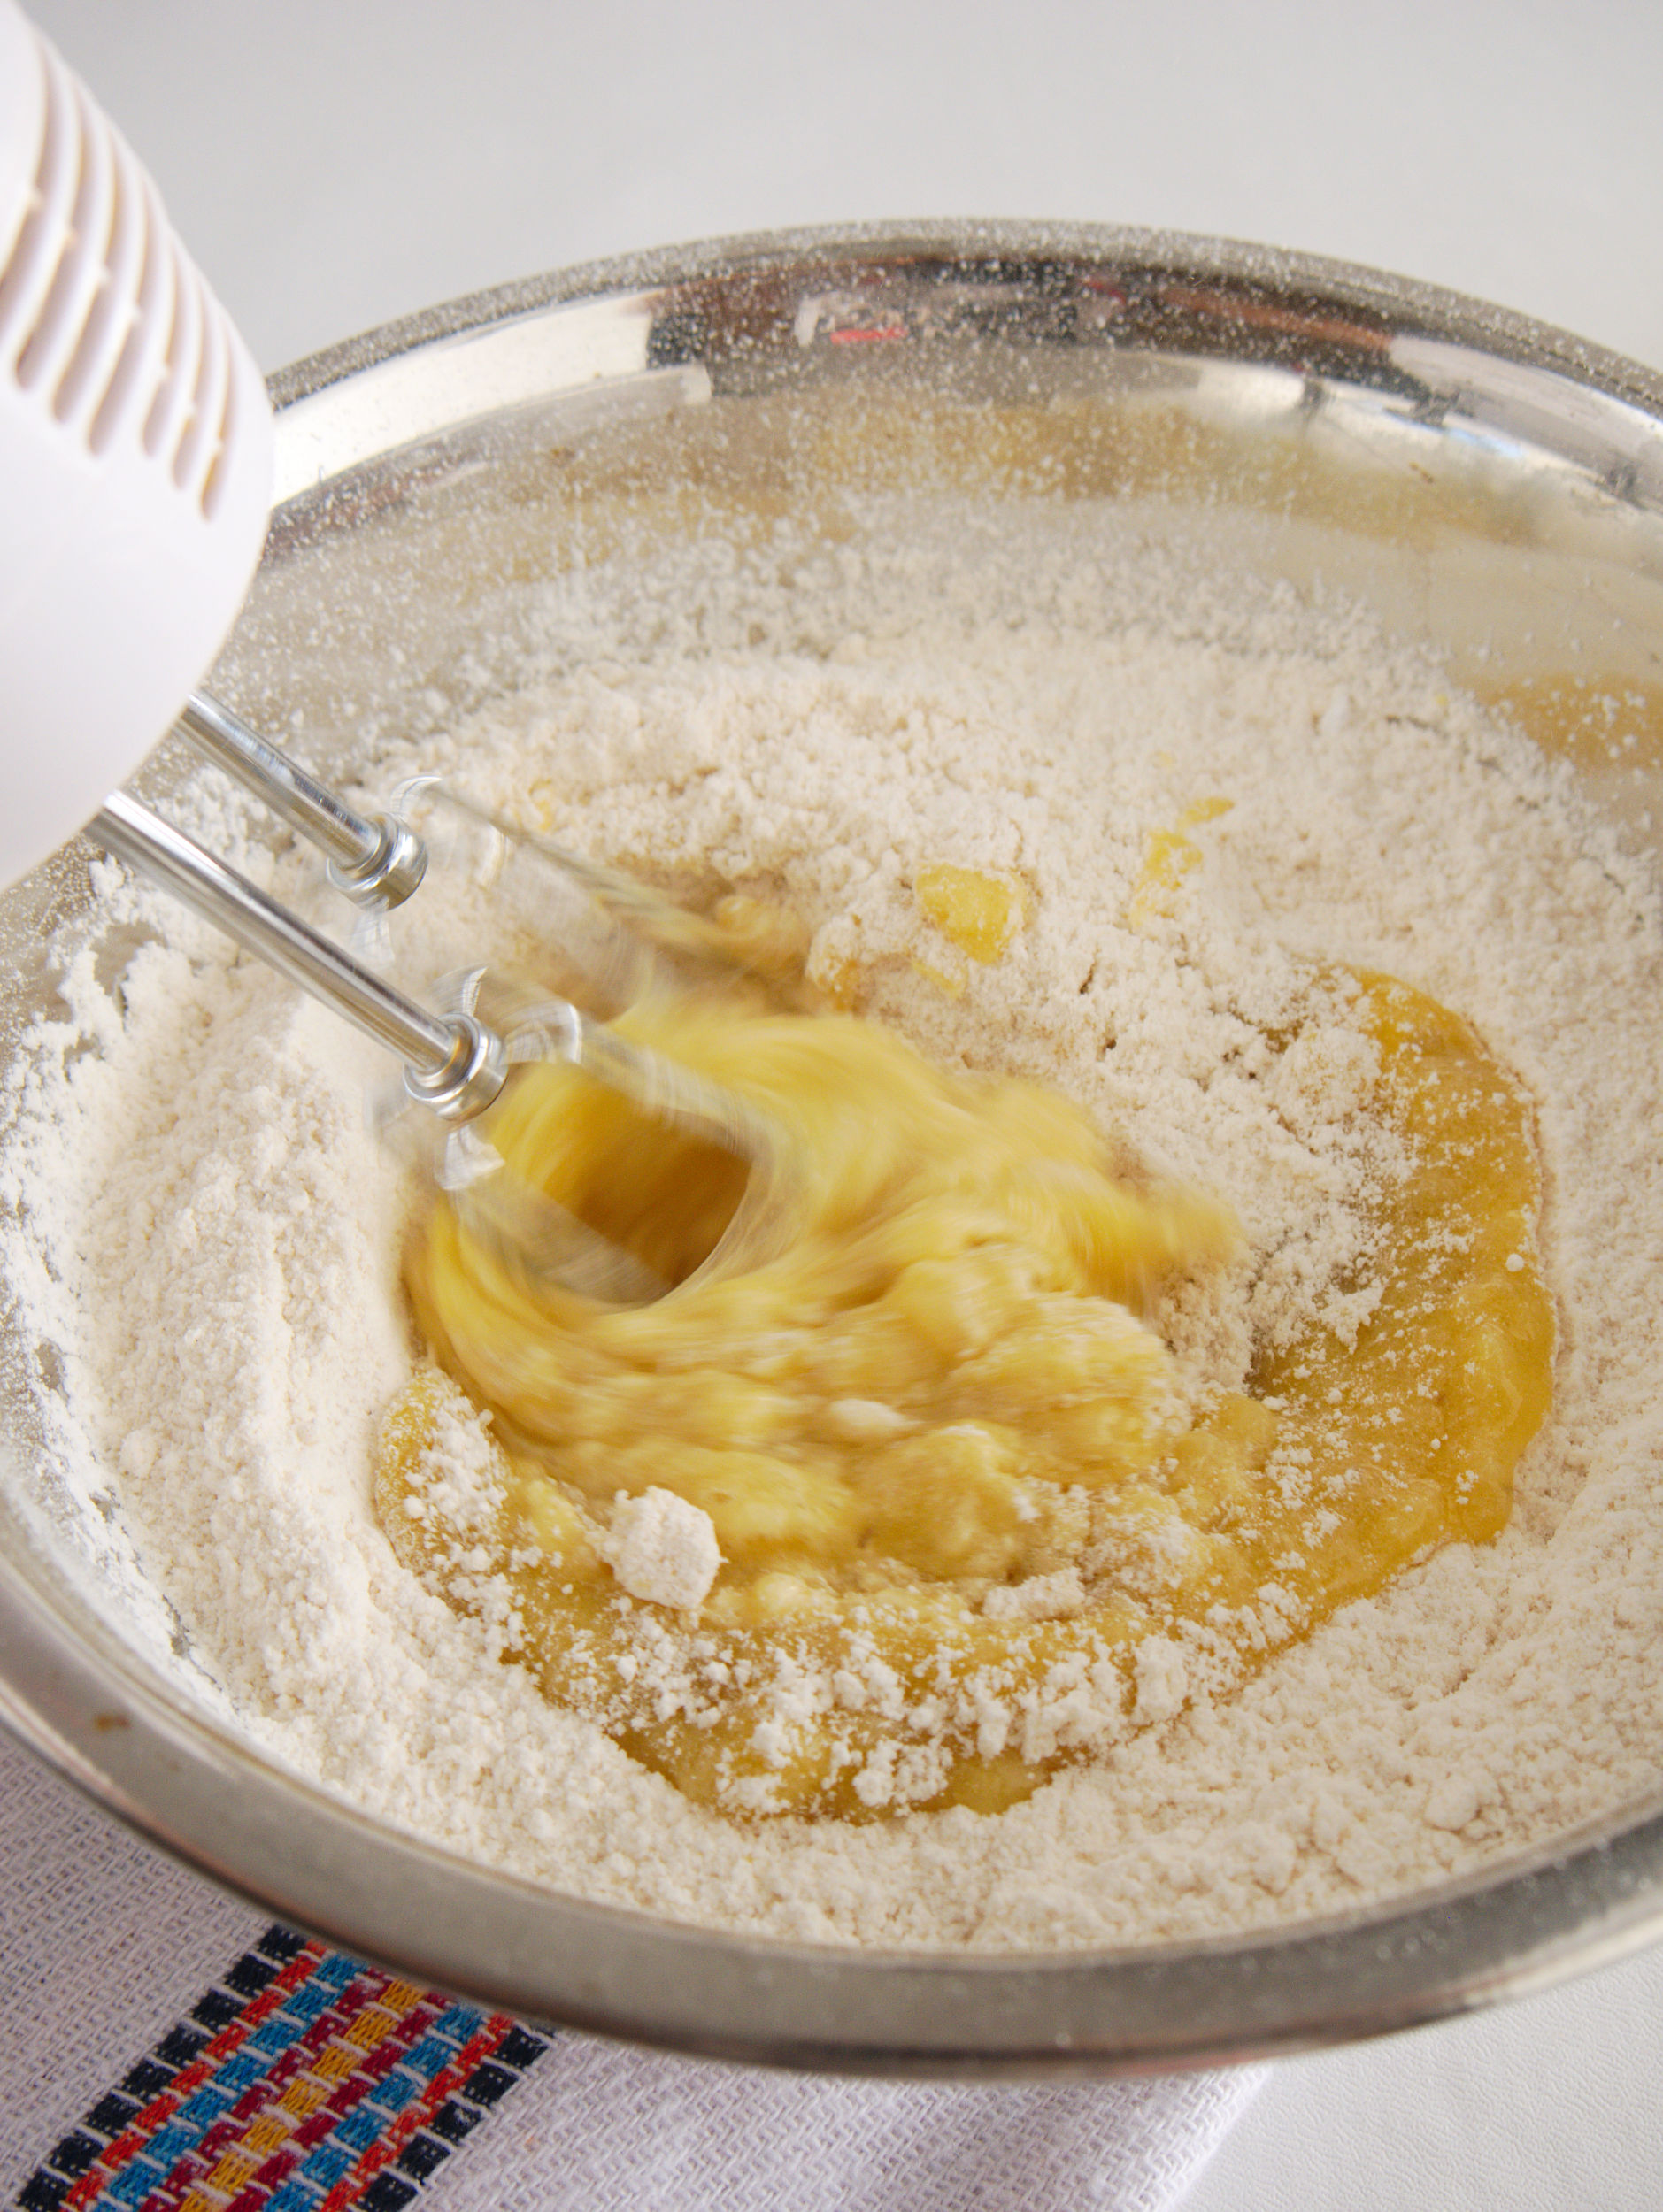 a hand mixer is used to combine the wet ingredients and dry ingredients